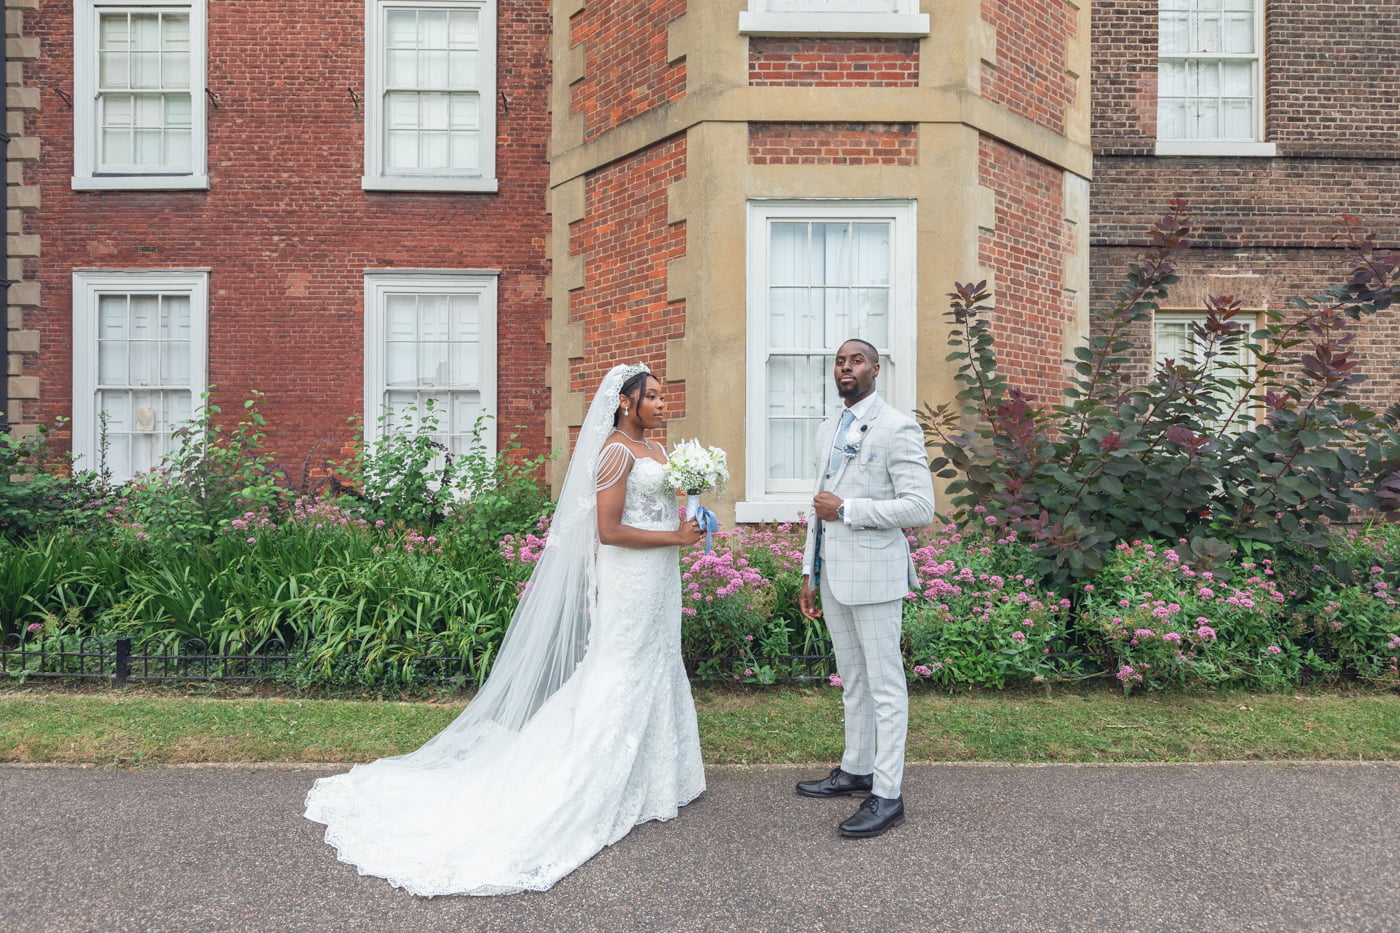 British Nigerian Bride's and Groom's Wedding Photography and Videography Service in Archway, North London